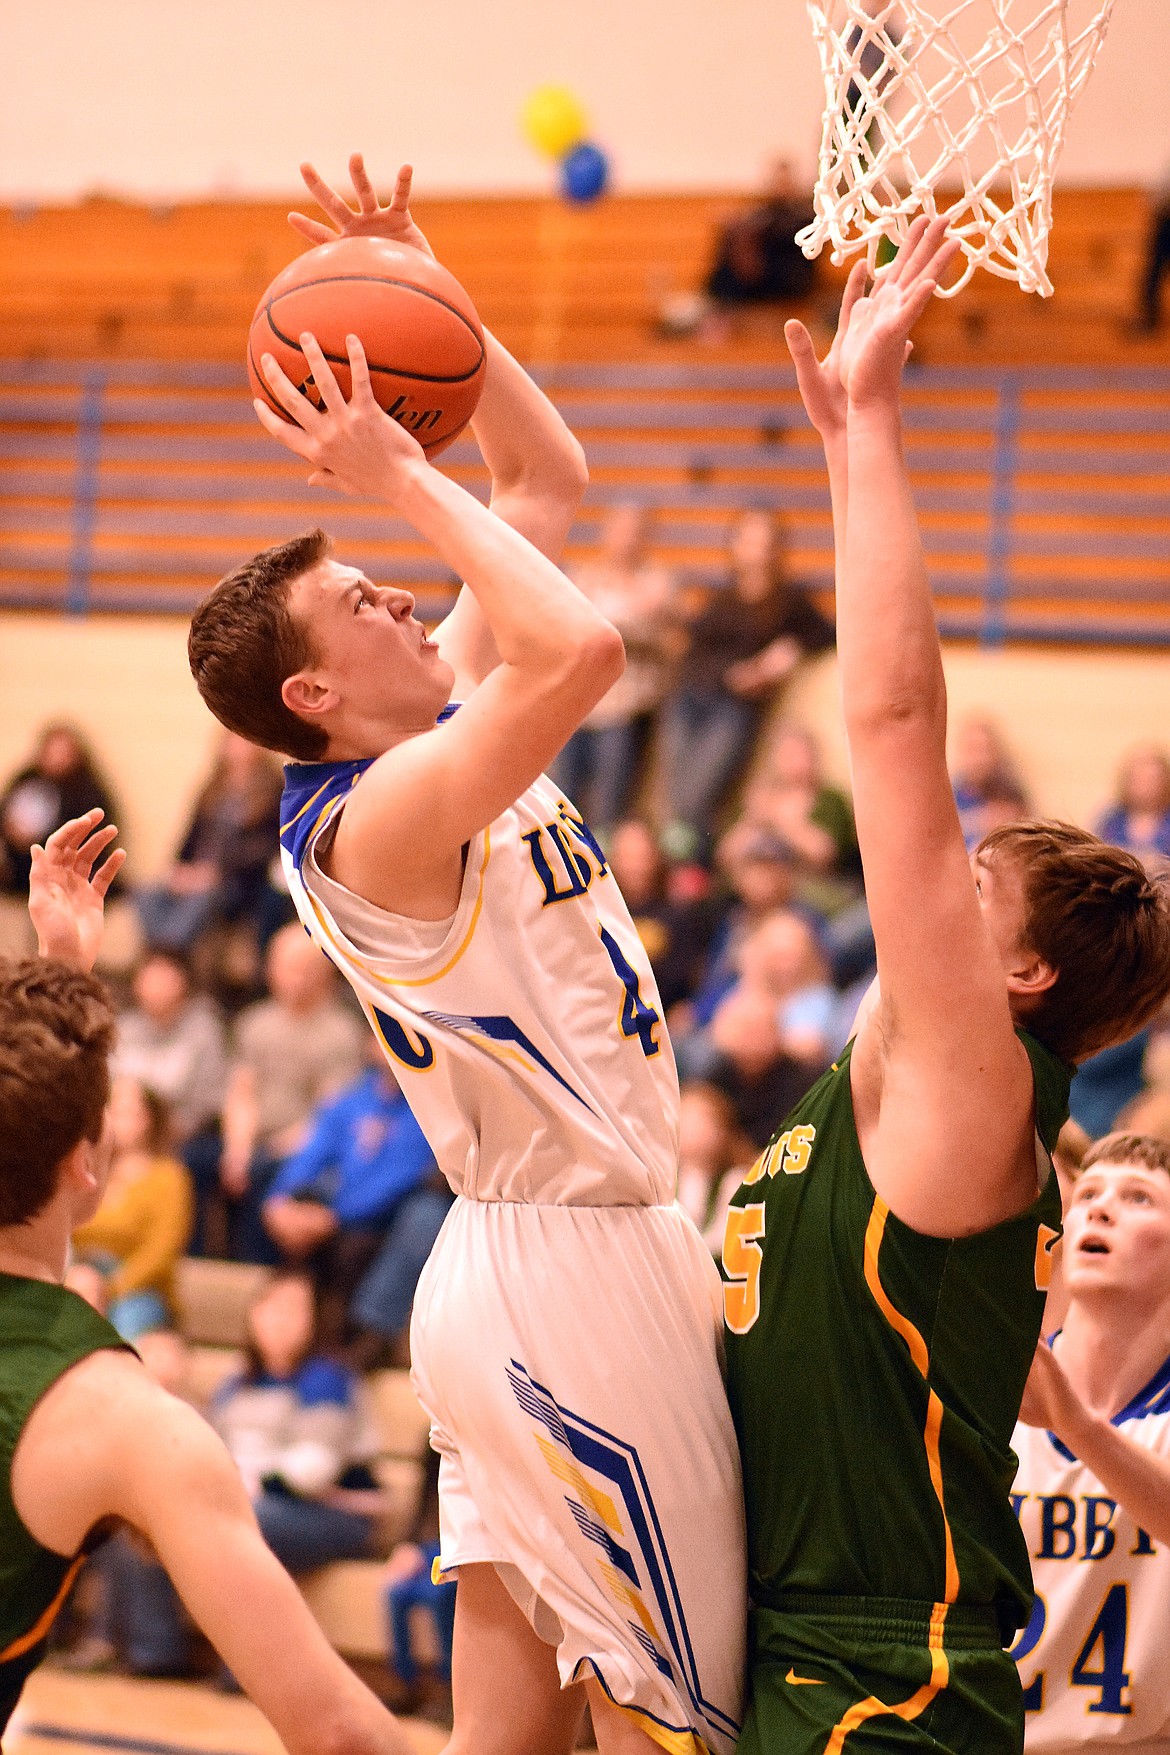 TJ Andersen goes up for a shot Feb. 21 against the Whitefish Bulldogs. (Duncan Adams/The Western News)